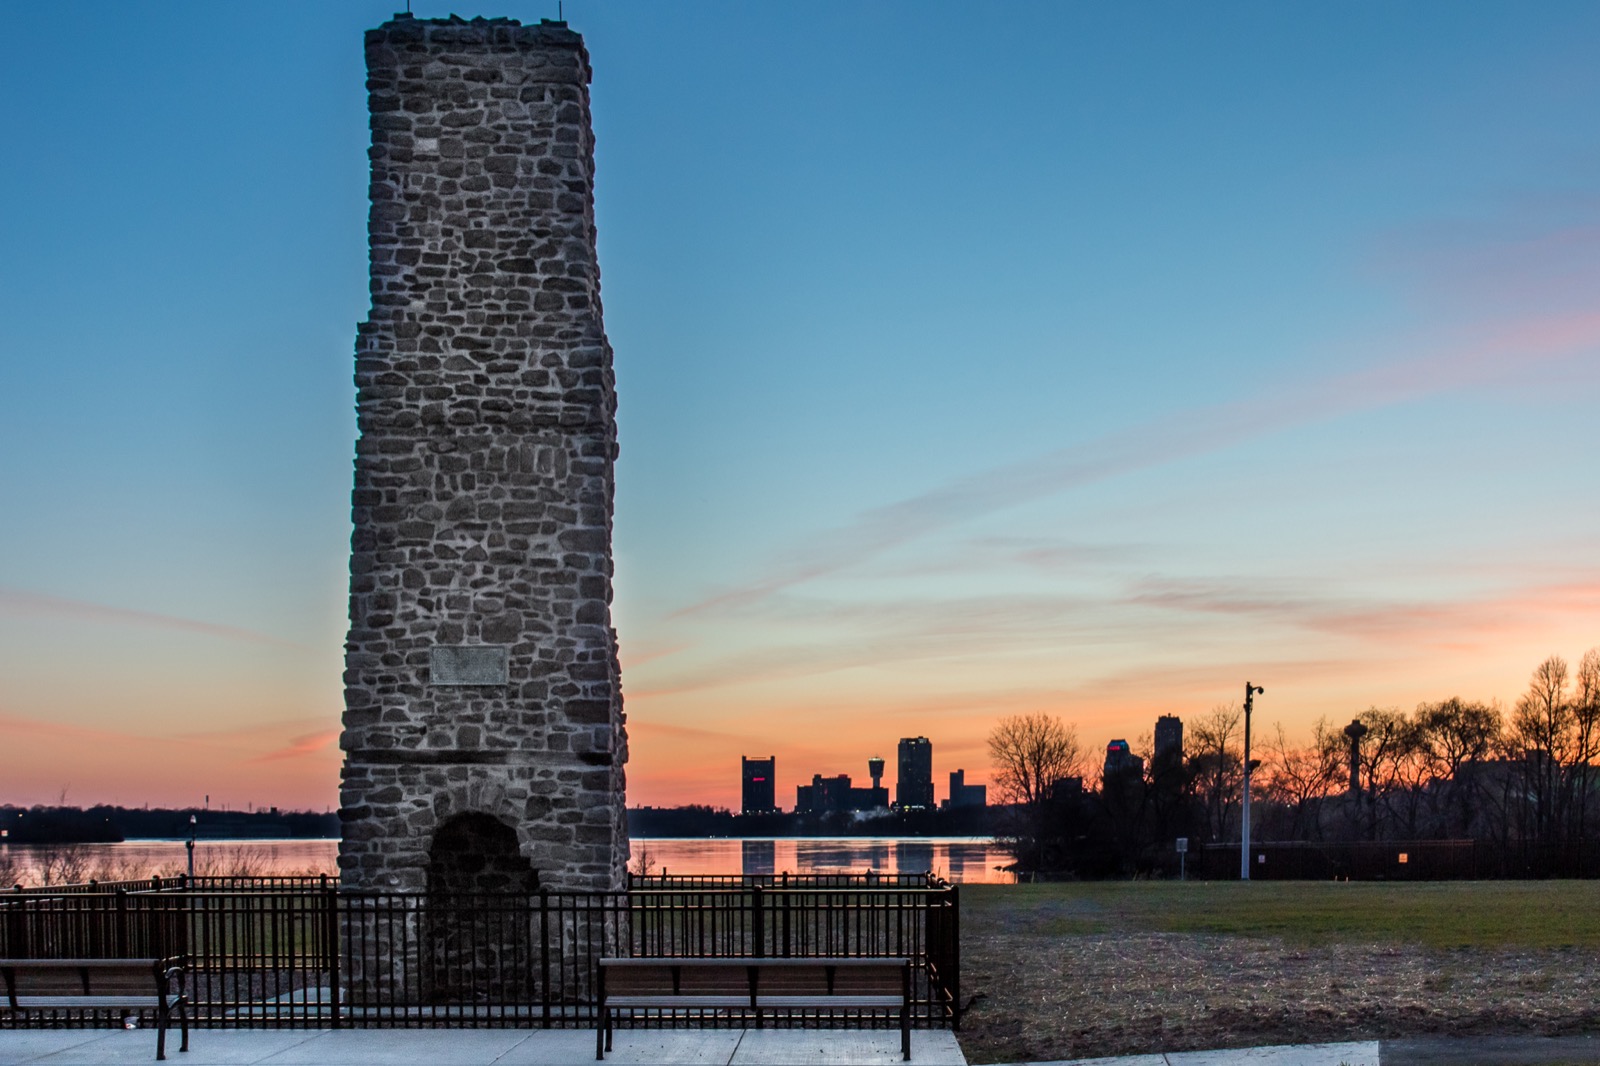 If You Get 11/15 on This Final Jeopardy Quiz, You’re a “Jeopardy!” Genius Old Stone Chimney